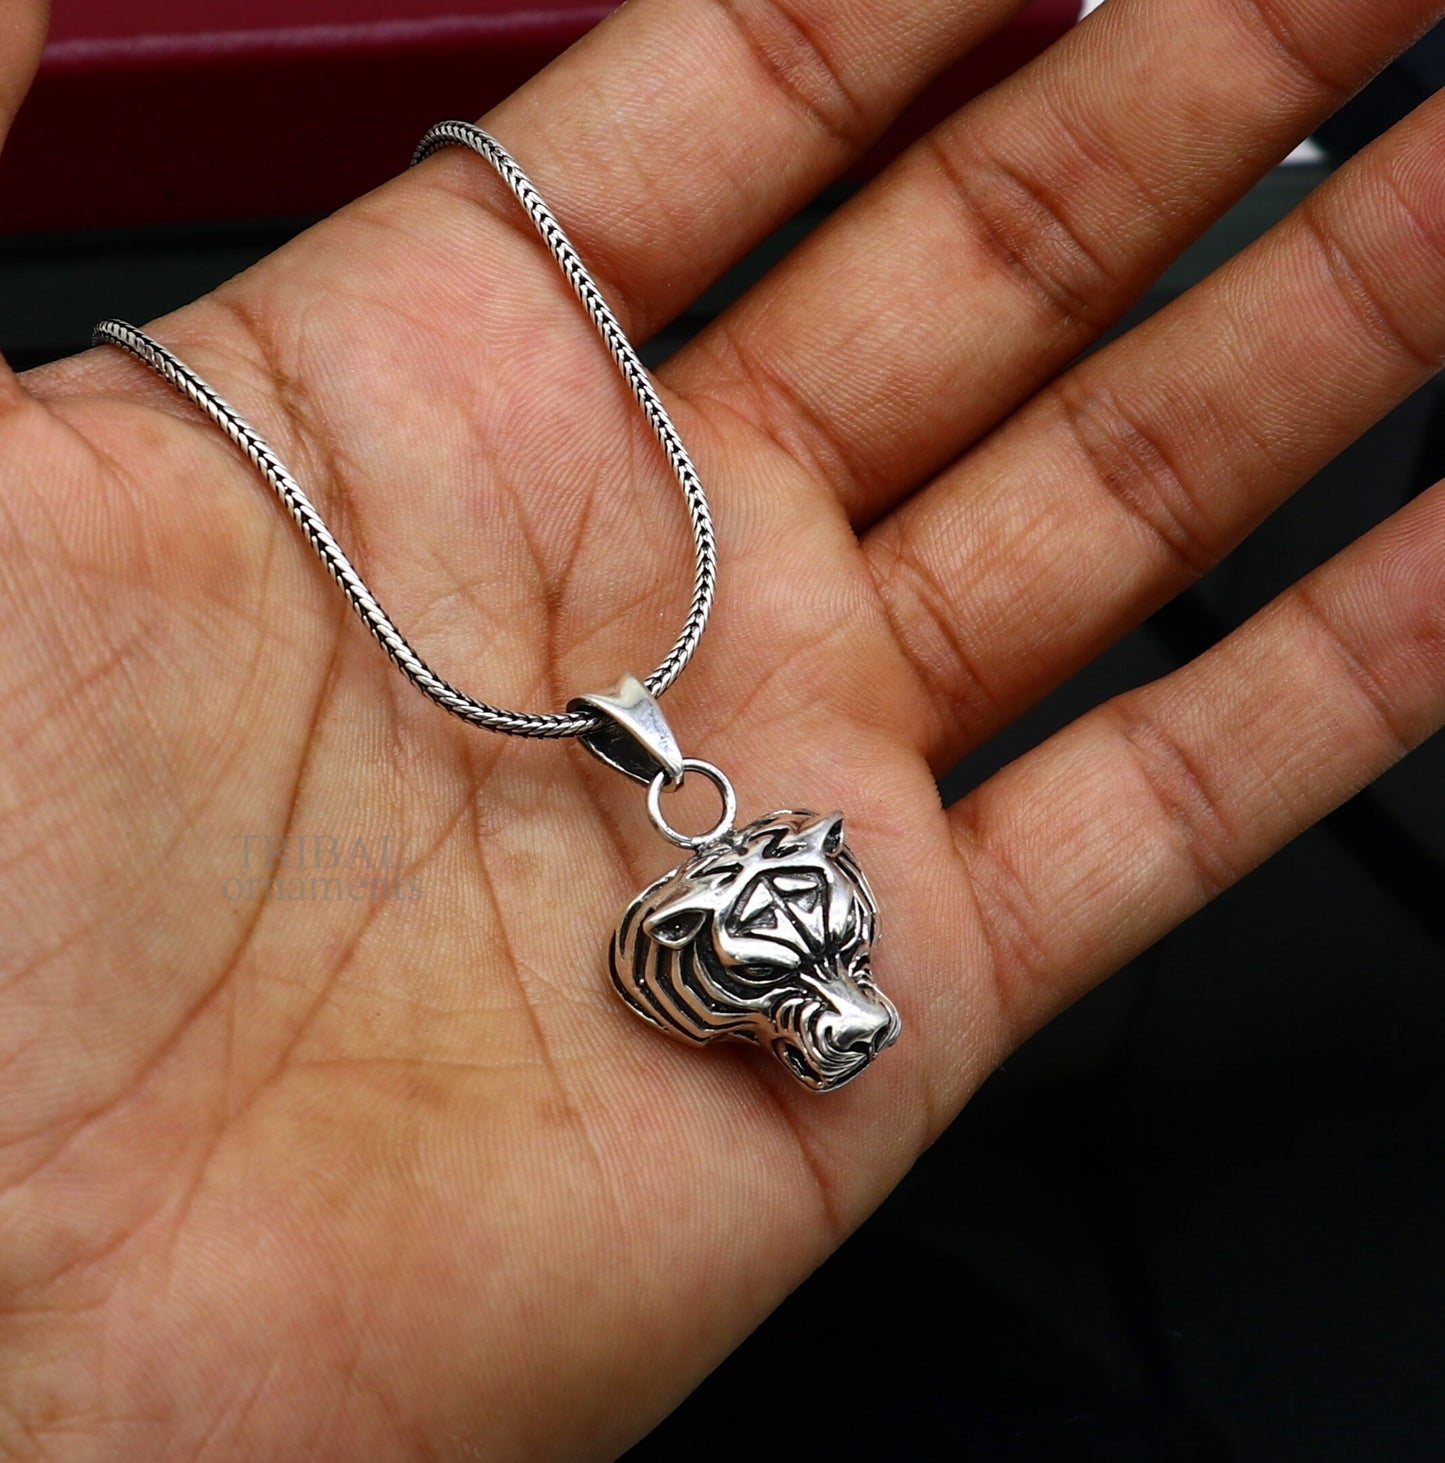 Elegant divine 925 sterling silver handmade tiger face design pendant solid pendant, best unisex gifting jewelry from india ssp1458 - TRIBAL ORNAMENTS